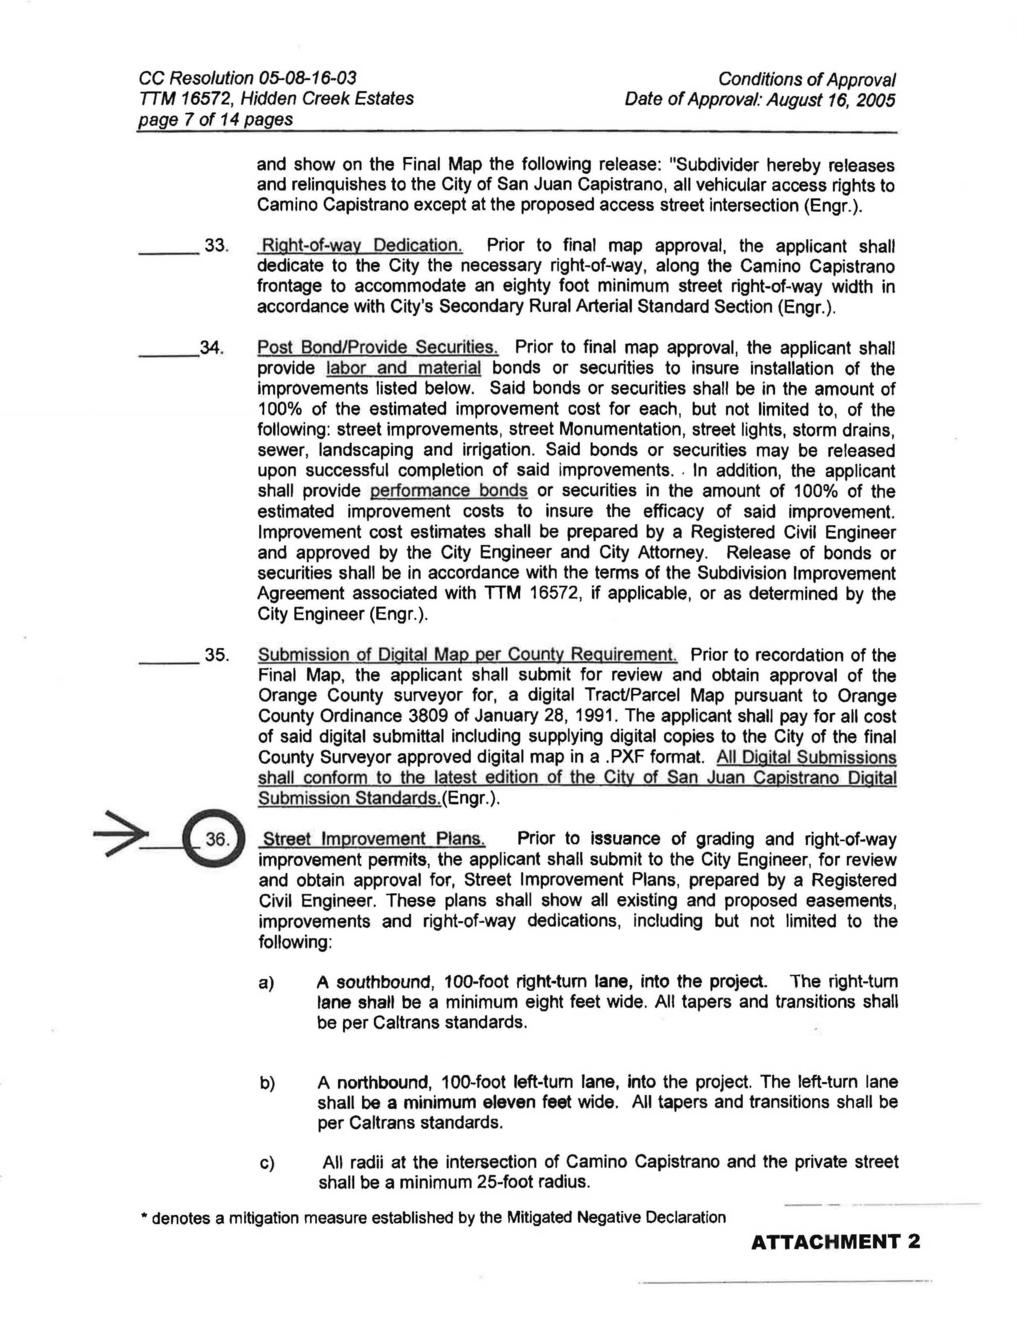 CC Resolution 05-08-16-03 ITM 16572, Hidden Creek Estates page 7 of 14 pages Conditions of Approval Date of Approval.